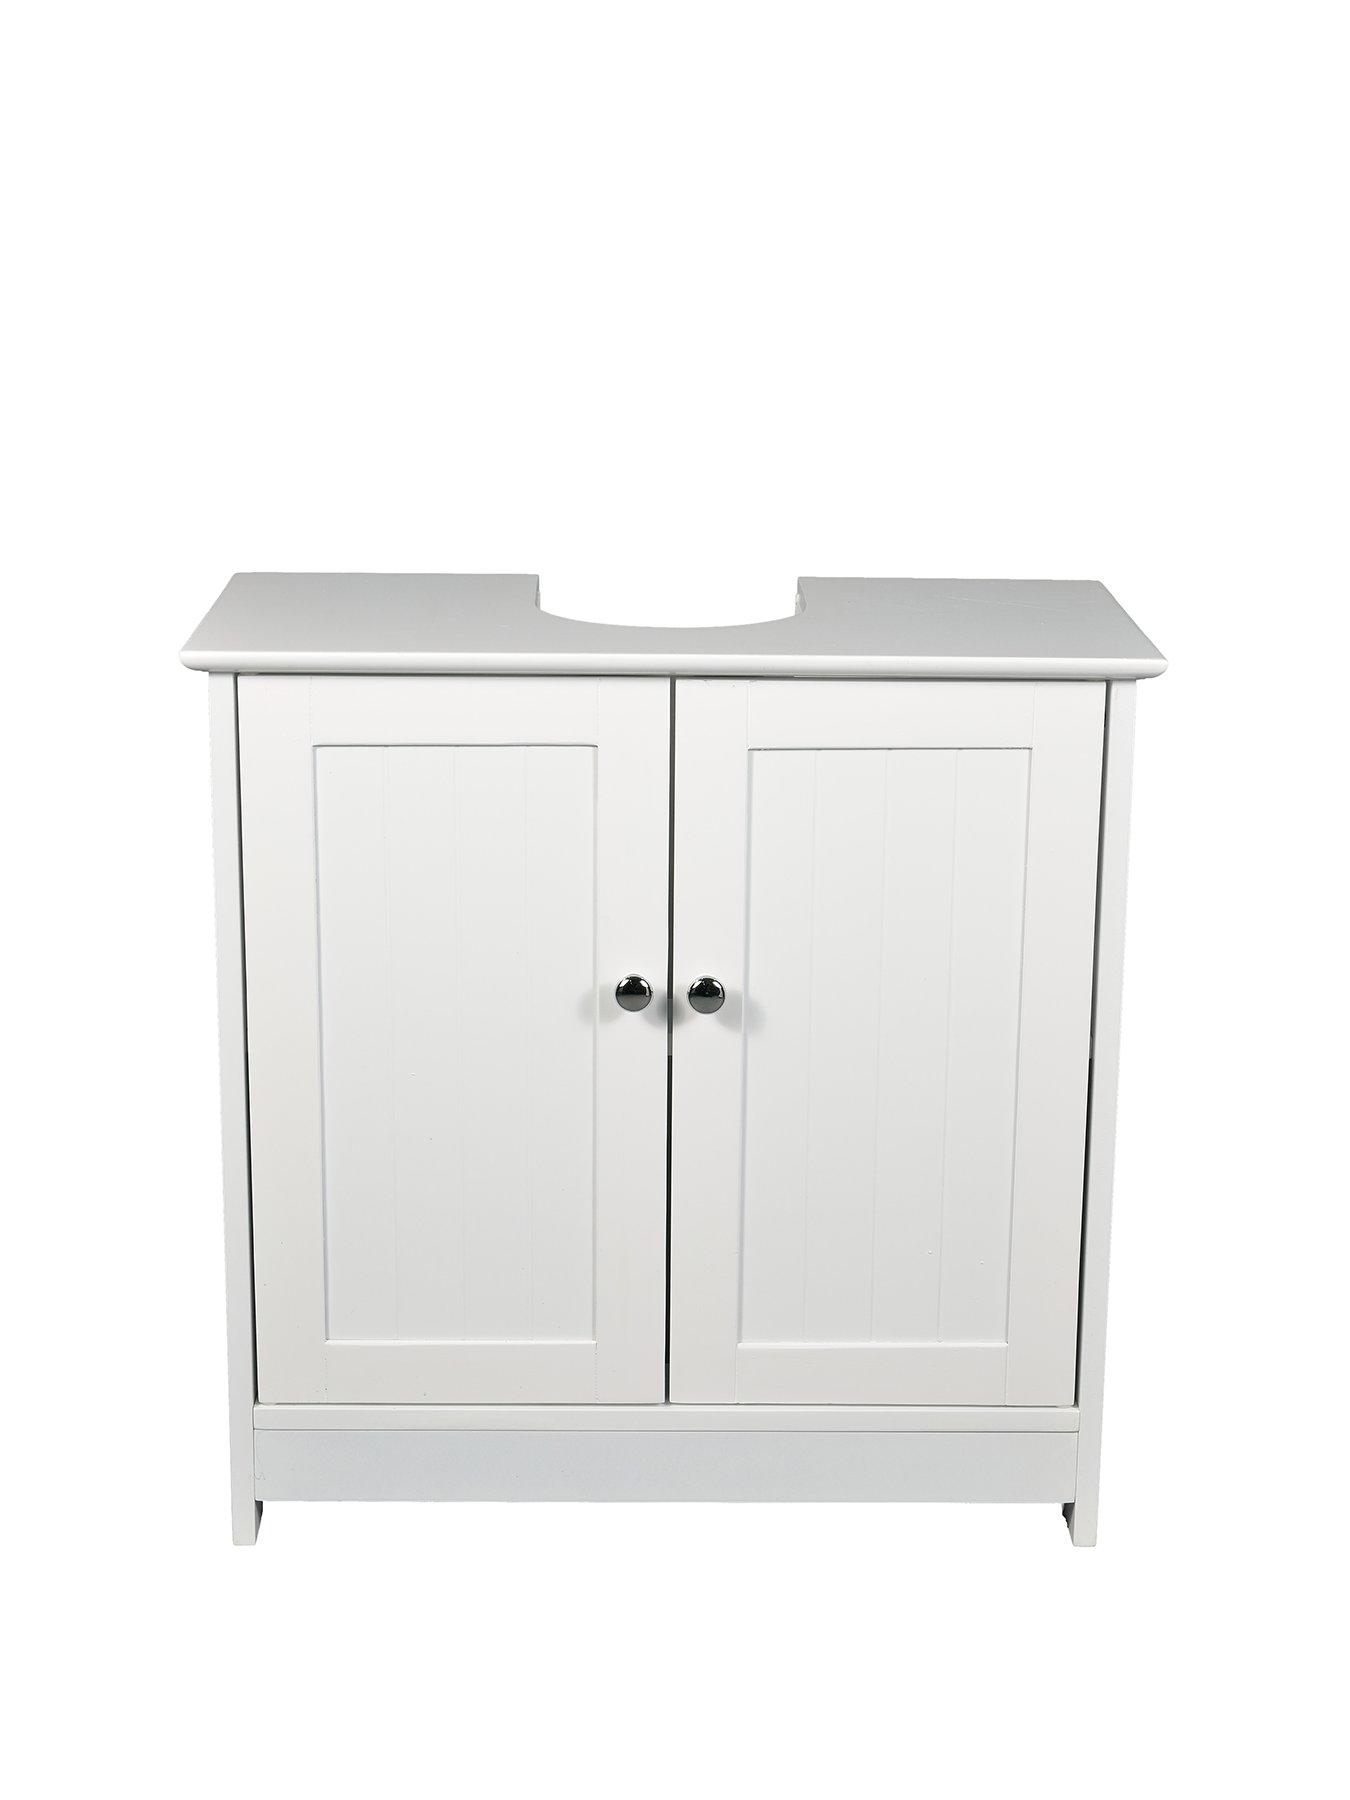 Details about   600mm Bathroom Mirror Cabinet 2 Door Storage Cupboard Wall Hung Grey Traditional 